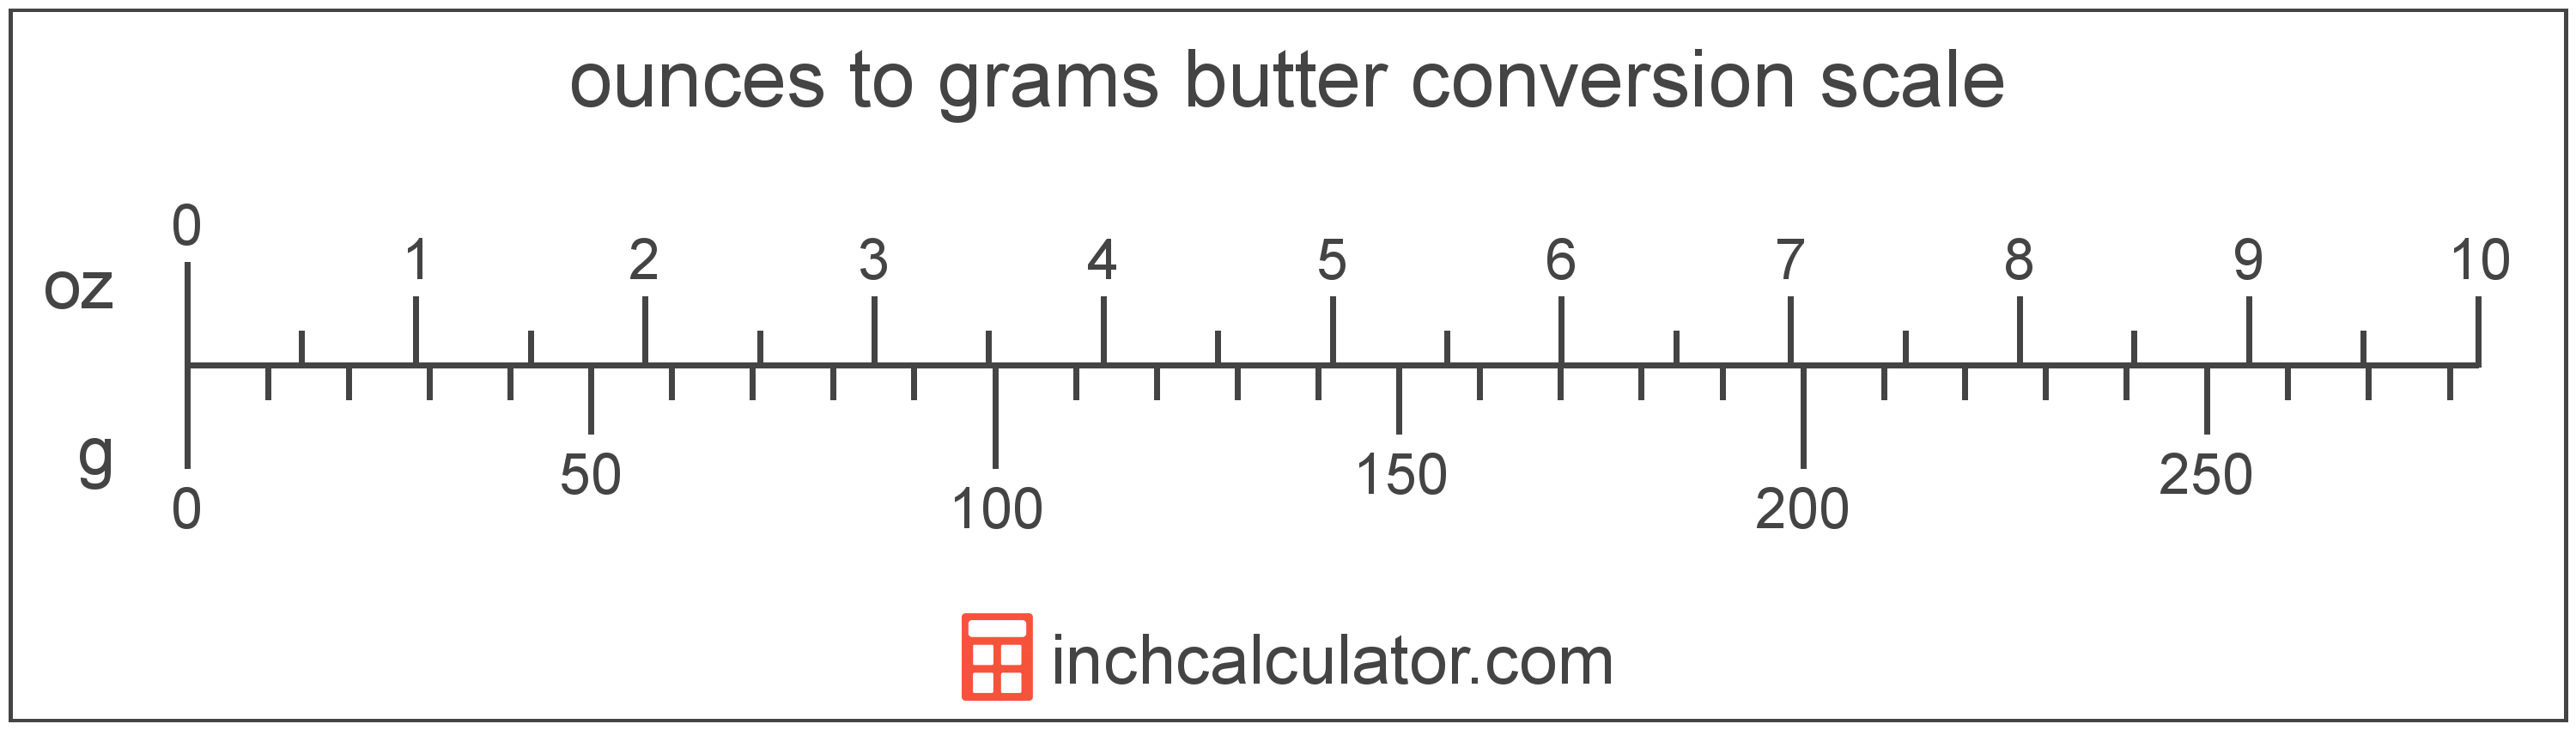 conversion scale showing grams and equivalent ounces butter values